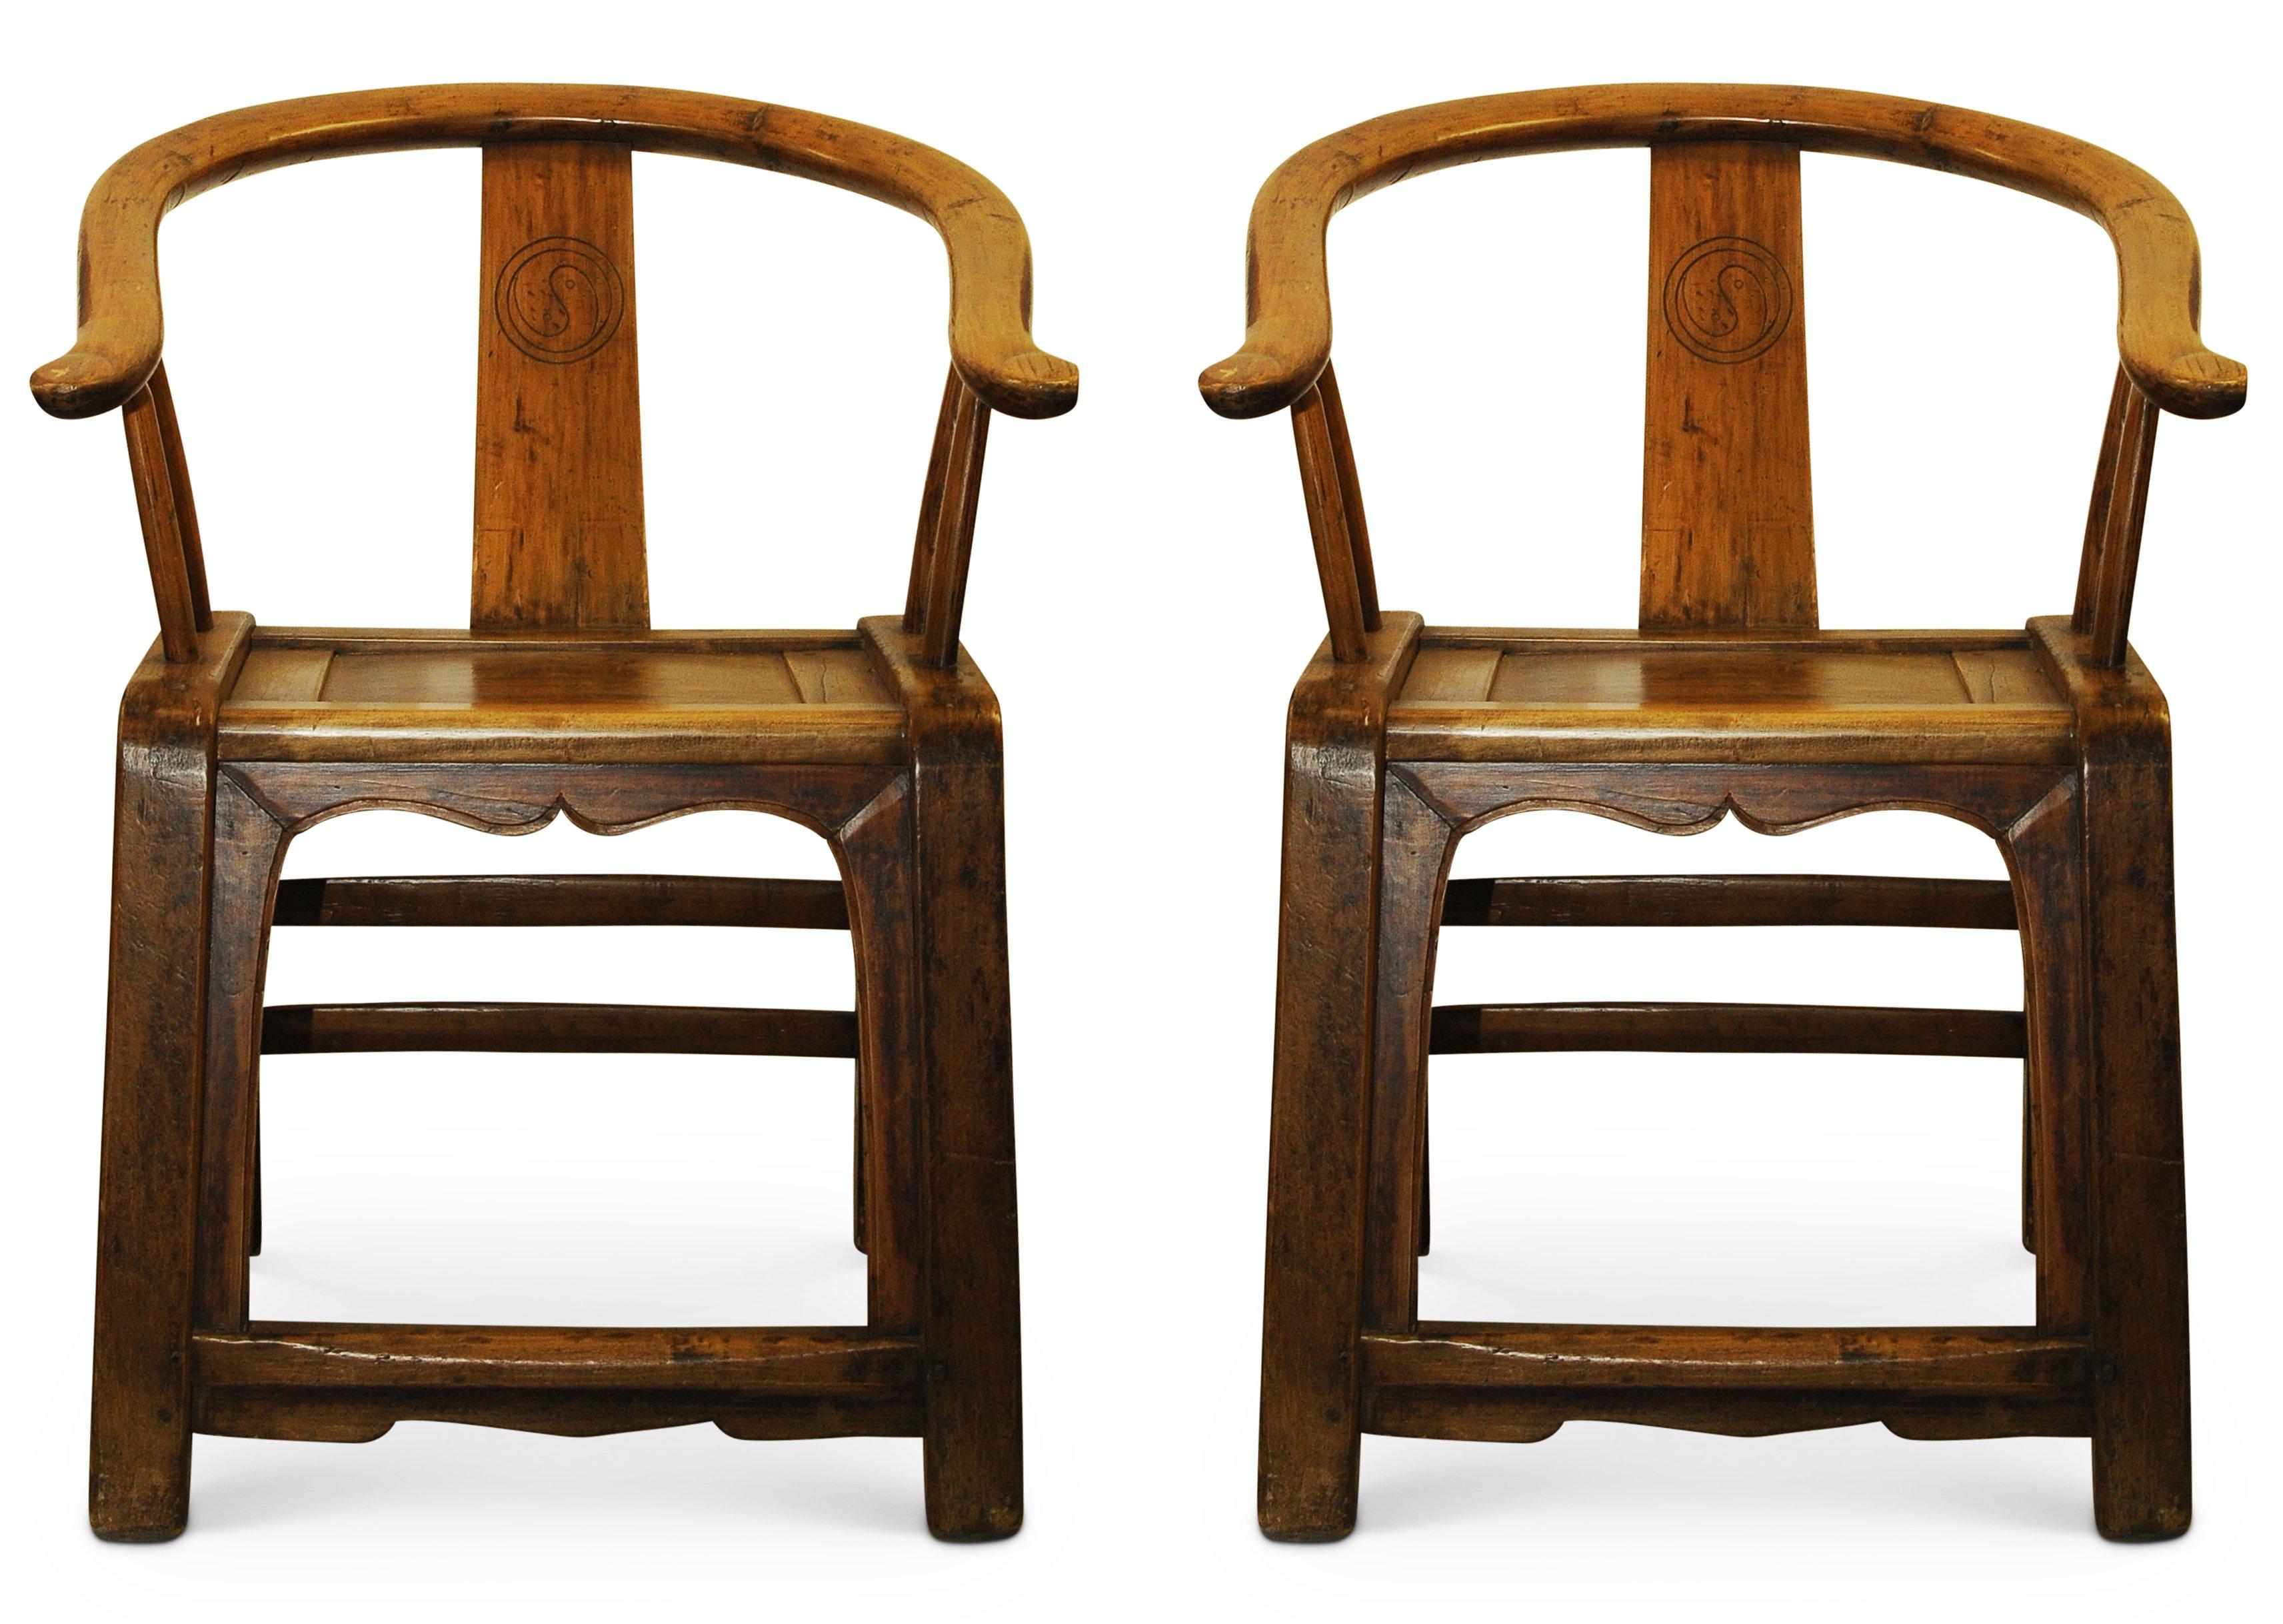 A Pair of Chinese Export Elm Wedding Chairs with Curving Back and Carved Rears
Price per chair

Would suit a period or modern property.

Would grace any hallway, or waiting area with their timeless lines and elegant design.